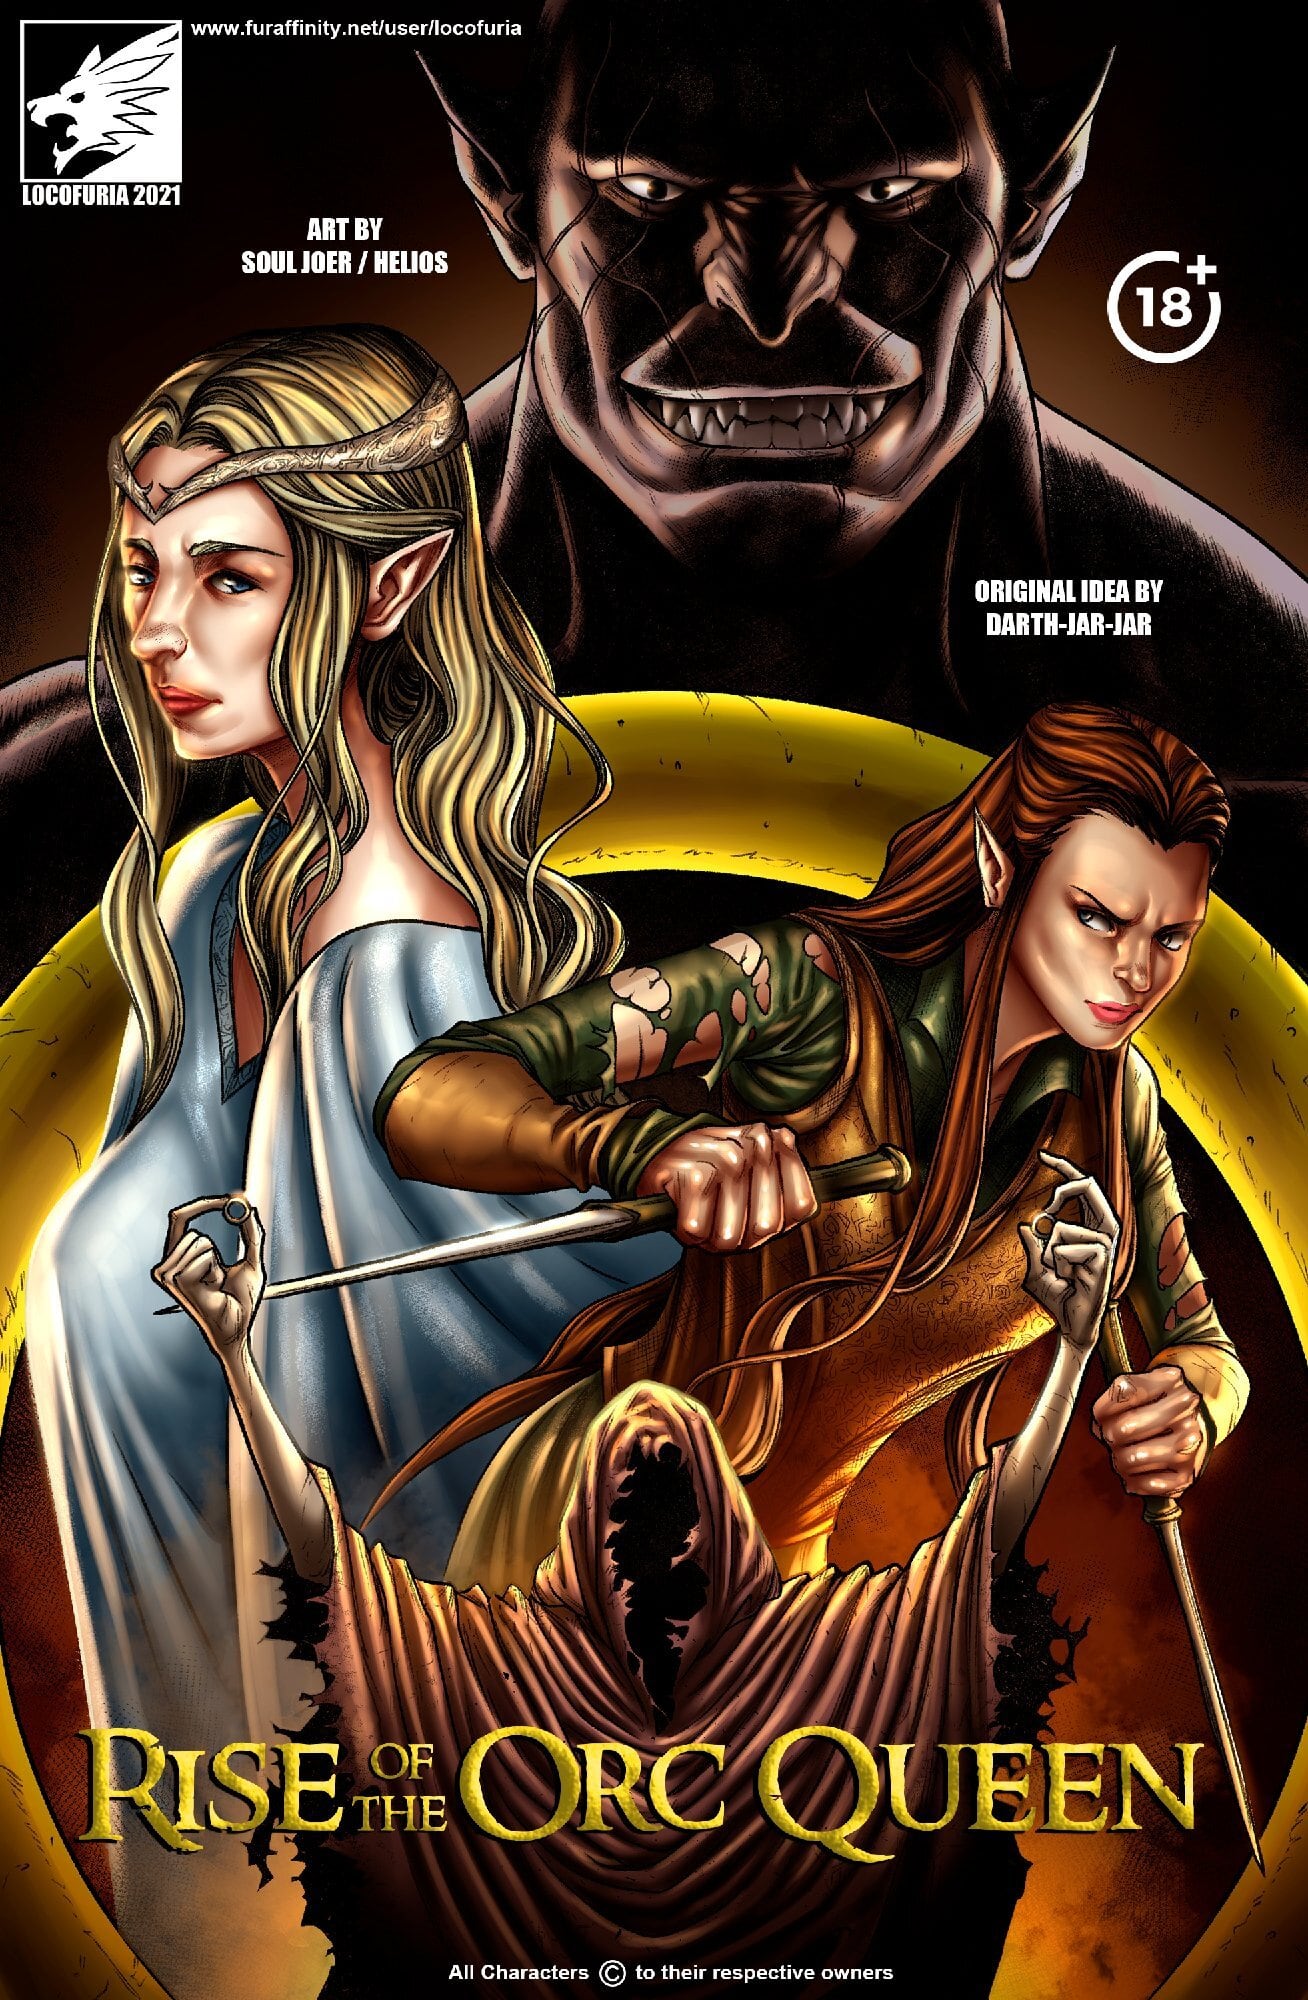 Lord Of The Rings Cartoon Porn - Rise of the Orc Queen â€“ Locofuria - Porn Cartoon Comics